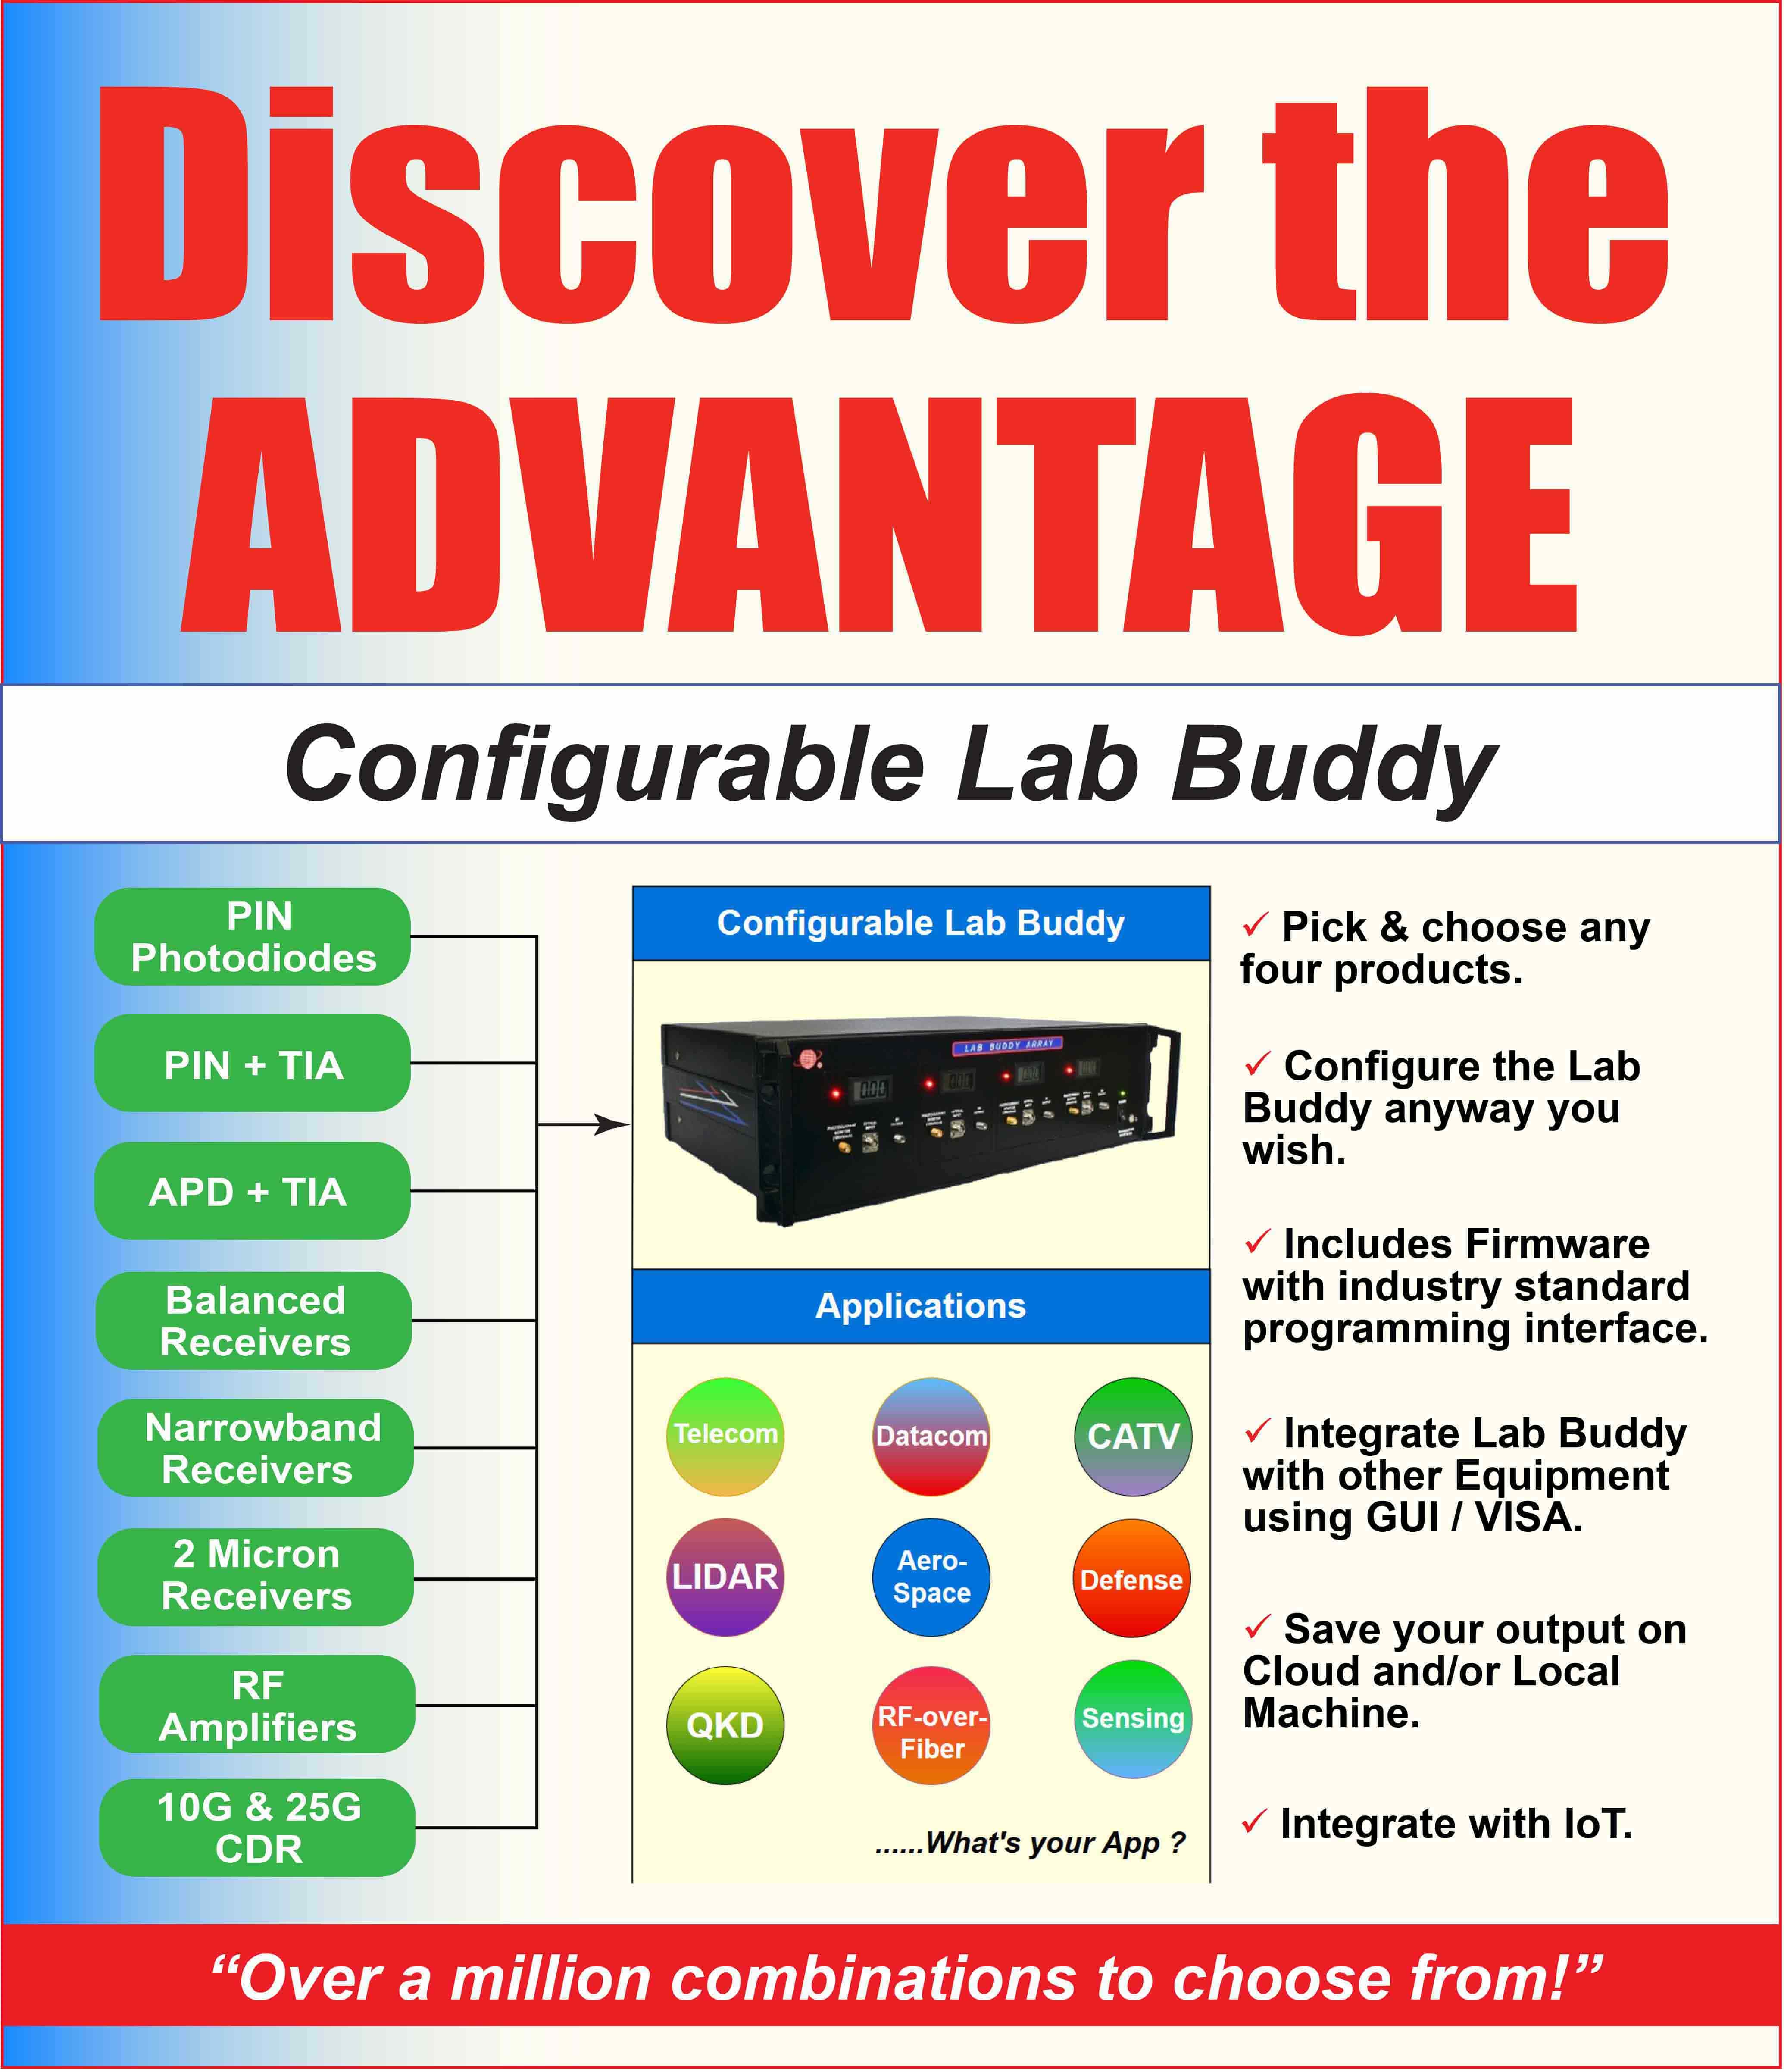 configurable lab buddy by discovery semiconductors